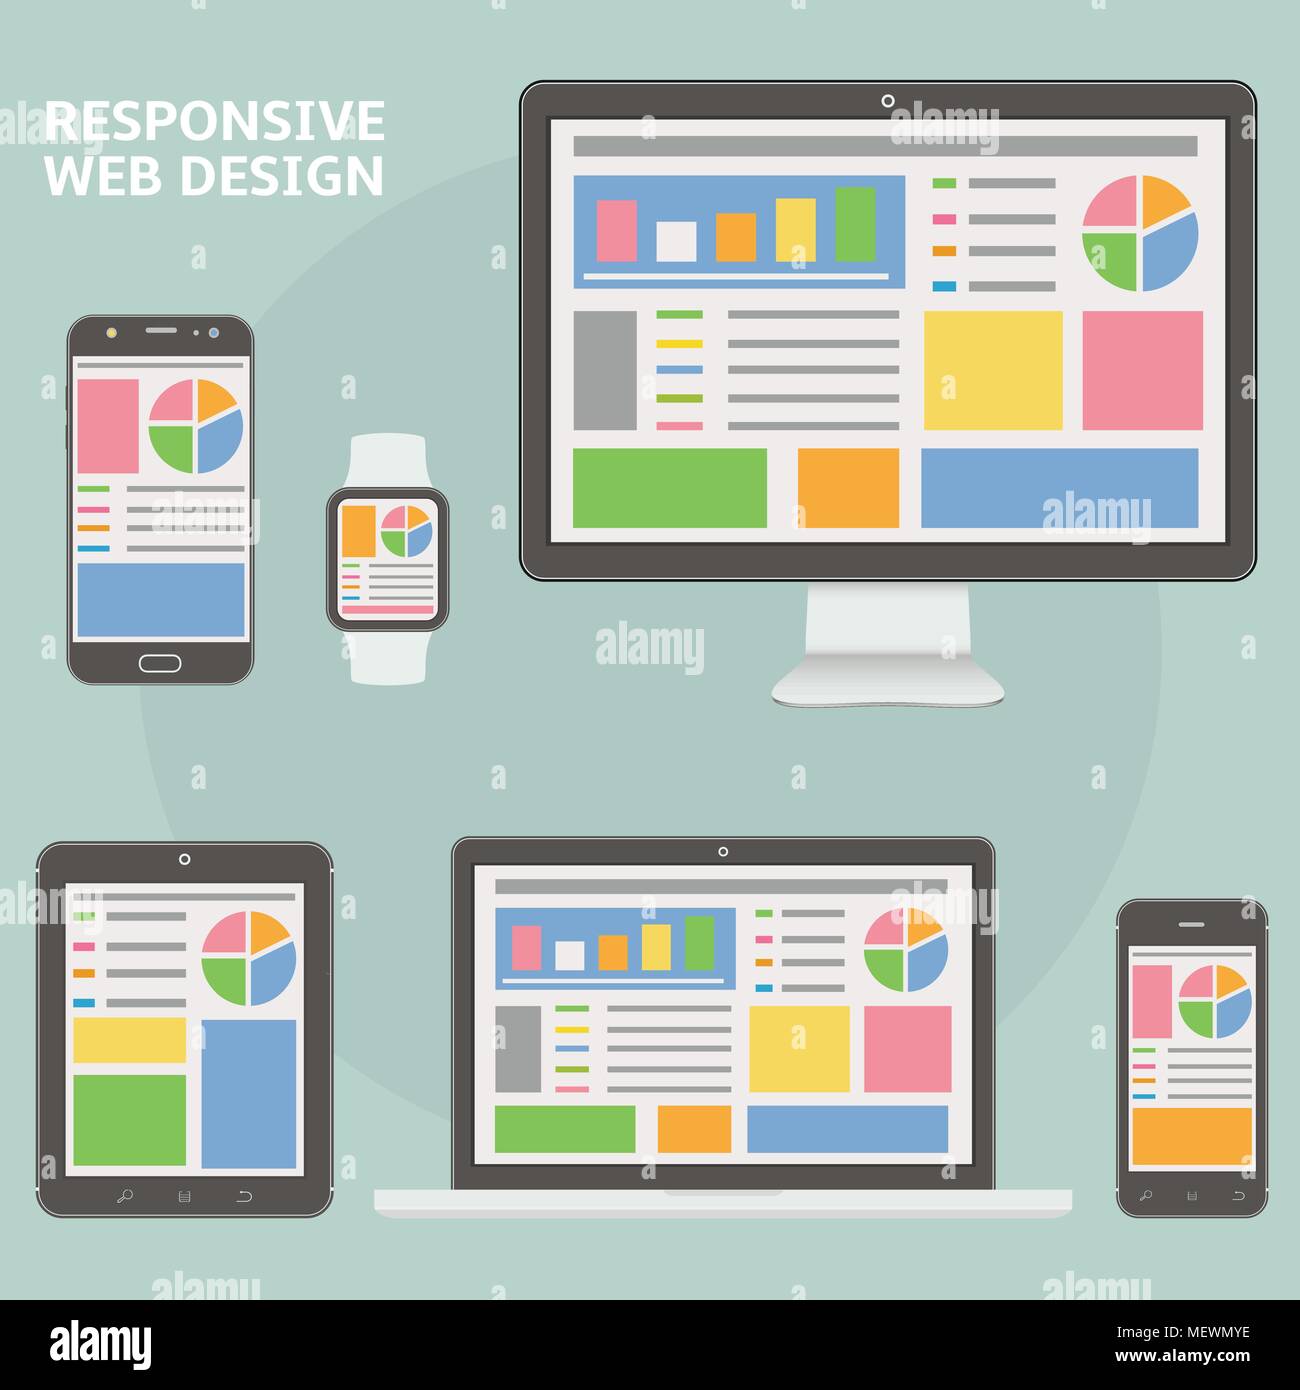 Responsive web design flat style devices. Vector illustration of laptop, desktop computer, tablet, smartphone and smart watch. Stock Vector